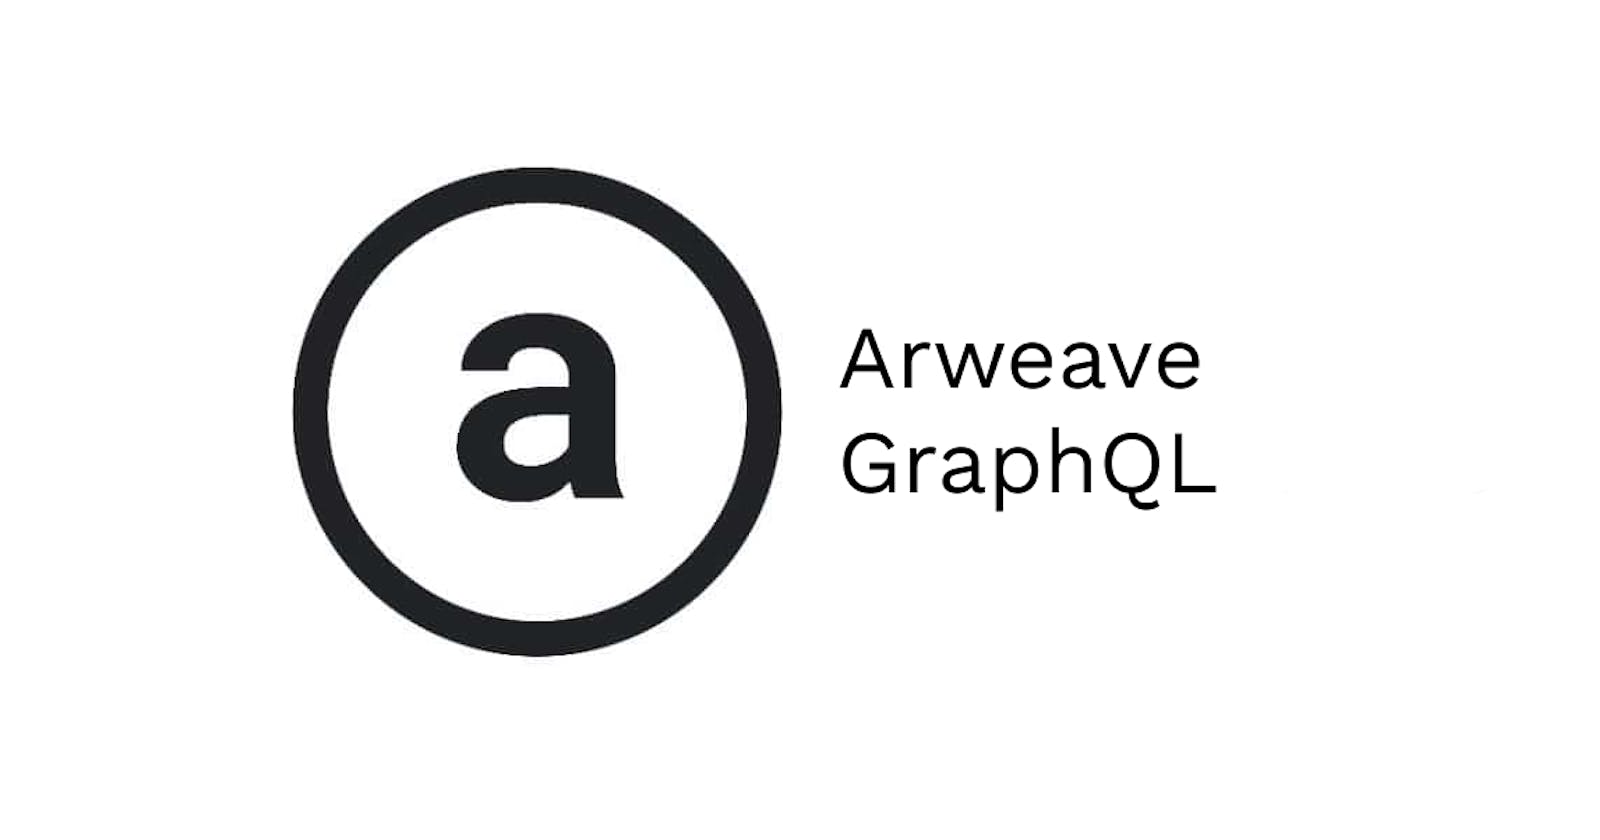 Querying the Arweave network with GraphQL